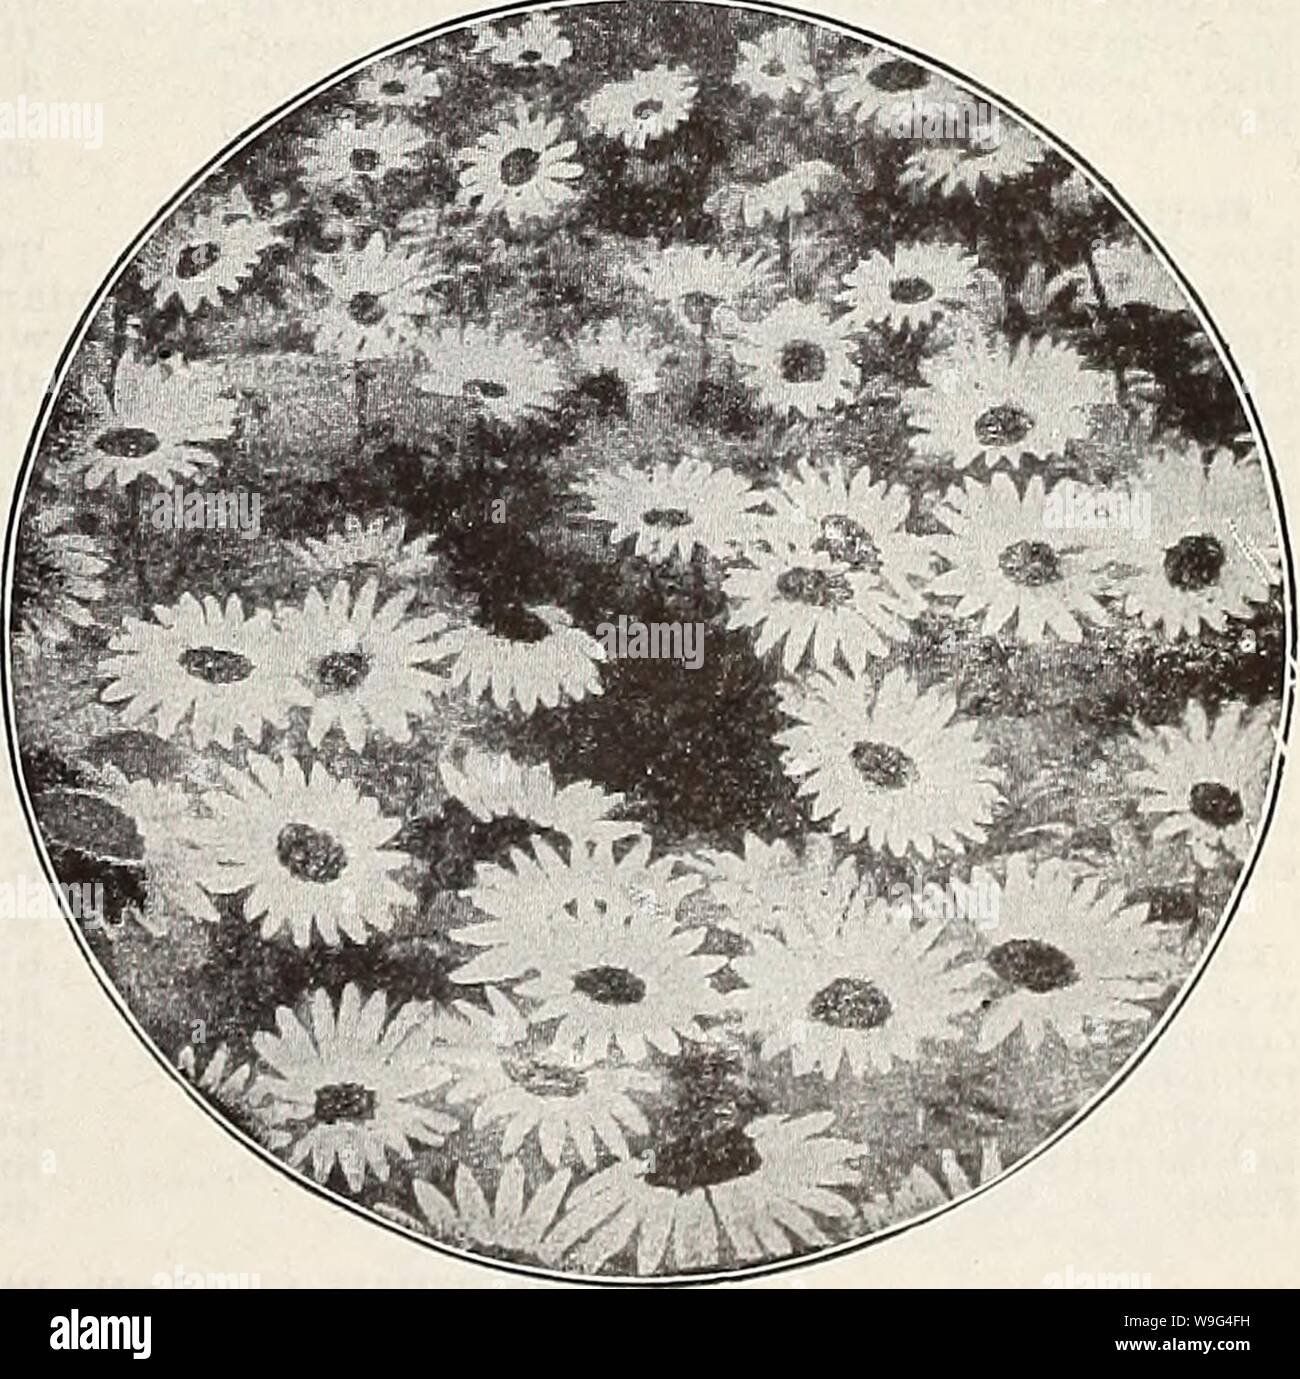 Archive image from page 108 of Currie's farm and garden annual. Currie's farm and garden annual : spring 1914  curriesfarmgarde19curr 11 Year: 1914 ( V, ; AQTTILEGIA. CALLIOPSIS OB COREOPSIS, CALLIOPSIS OR COREOPSIS. The herbaceous border is incomplete without one or more varieties of Coreopsis. They are exceedingly attractive, bloom continuously from June till late in the fall, and are very easy of cultivation. The flowers are neat in form, are borne on light but wirv and graceful stems and arrange beauti- fully in vases. C. Grandiflora—2 feet, June. Deep yellow. C. Laneeolata—2 feet, June. G Stock Photo